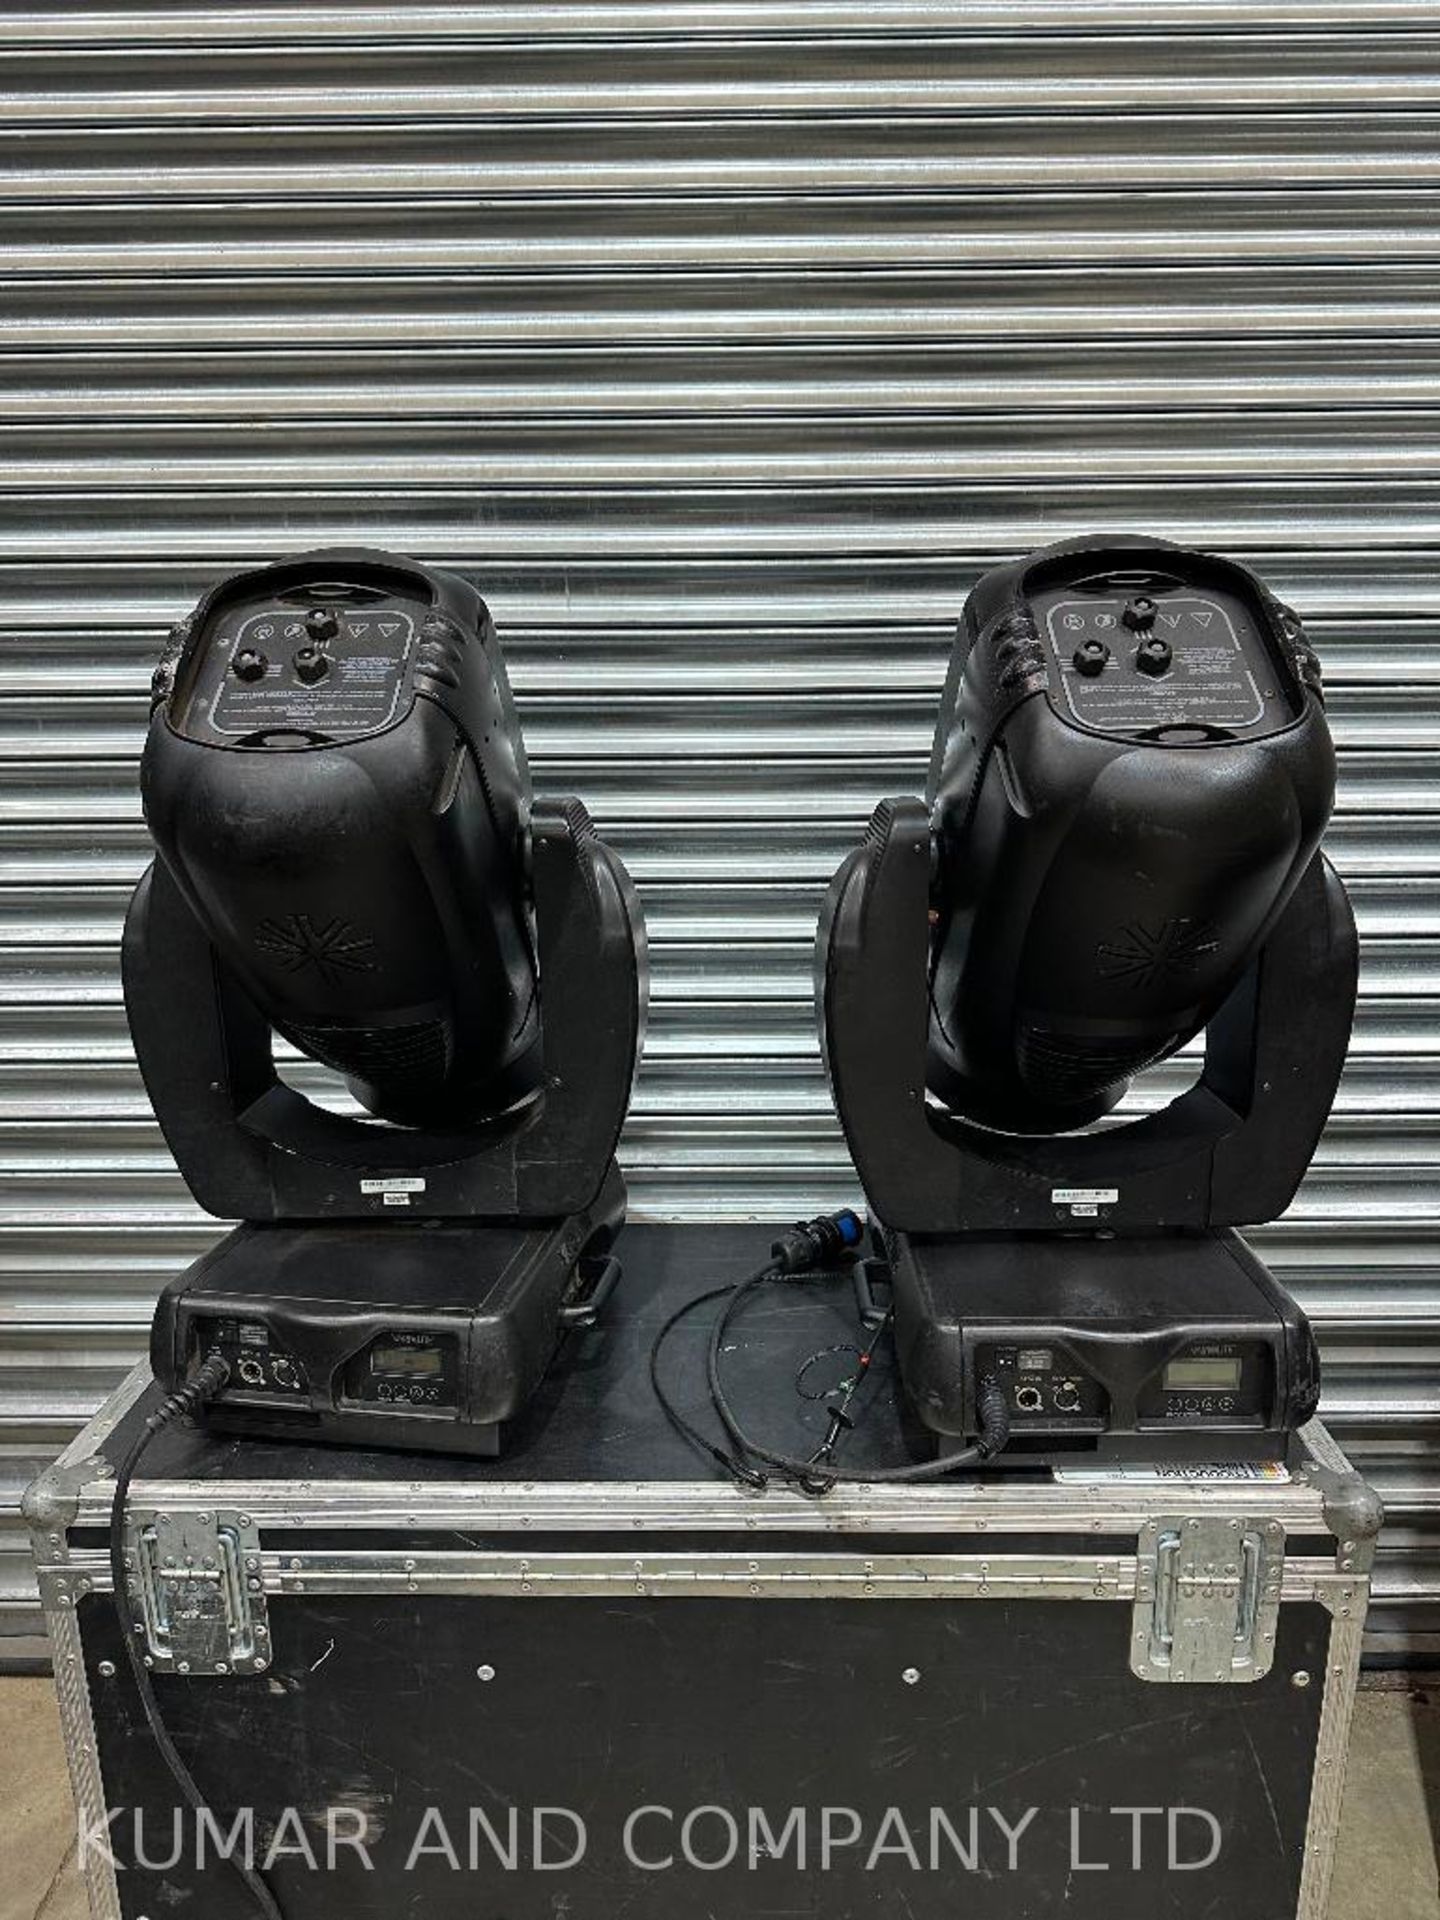 Varilite VL3500 Wash FX -Sold as a Pair in a flightcase. - The VL3500 Wash FX luminaire features int - Image 2 of 4